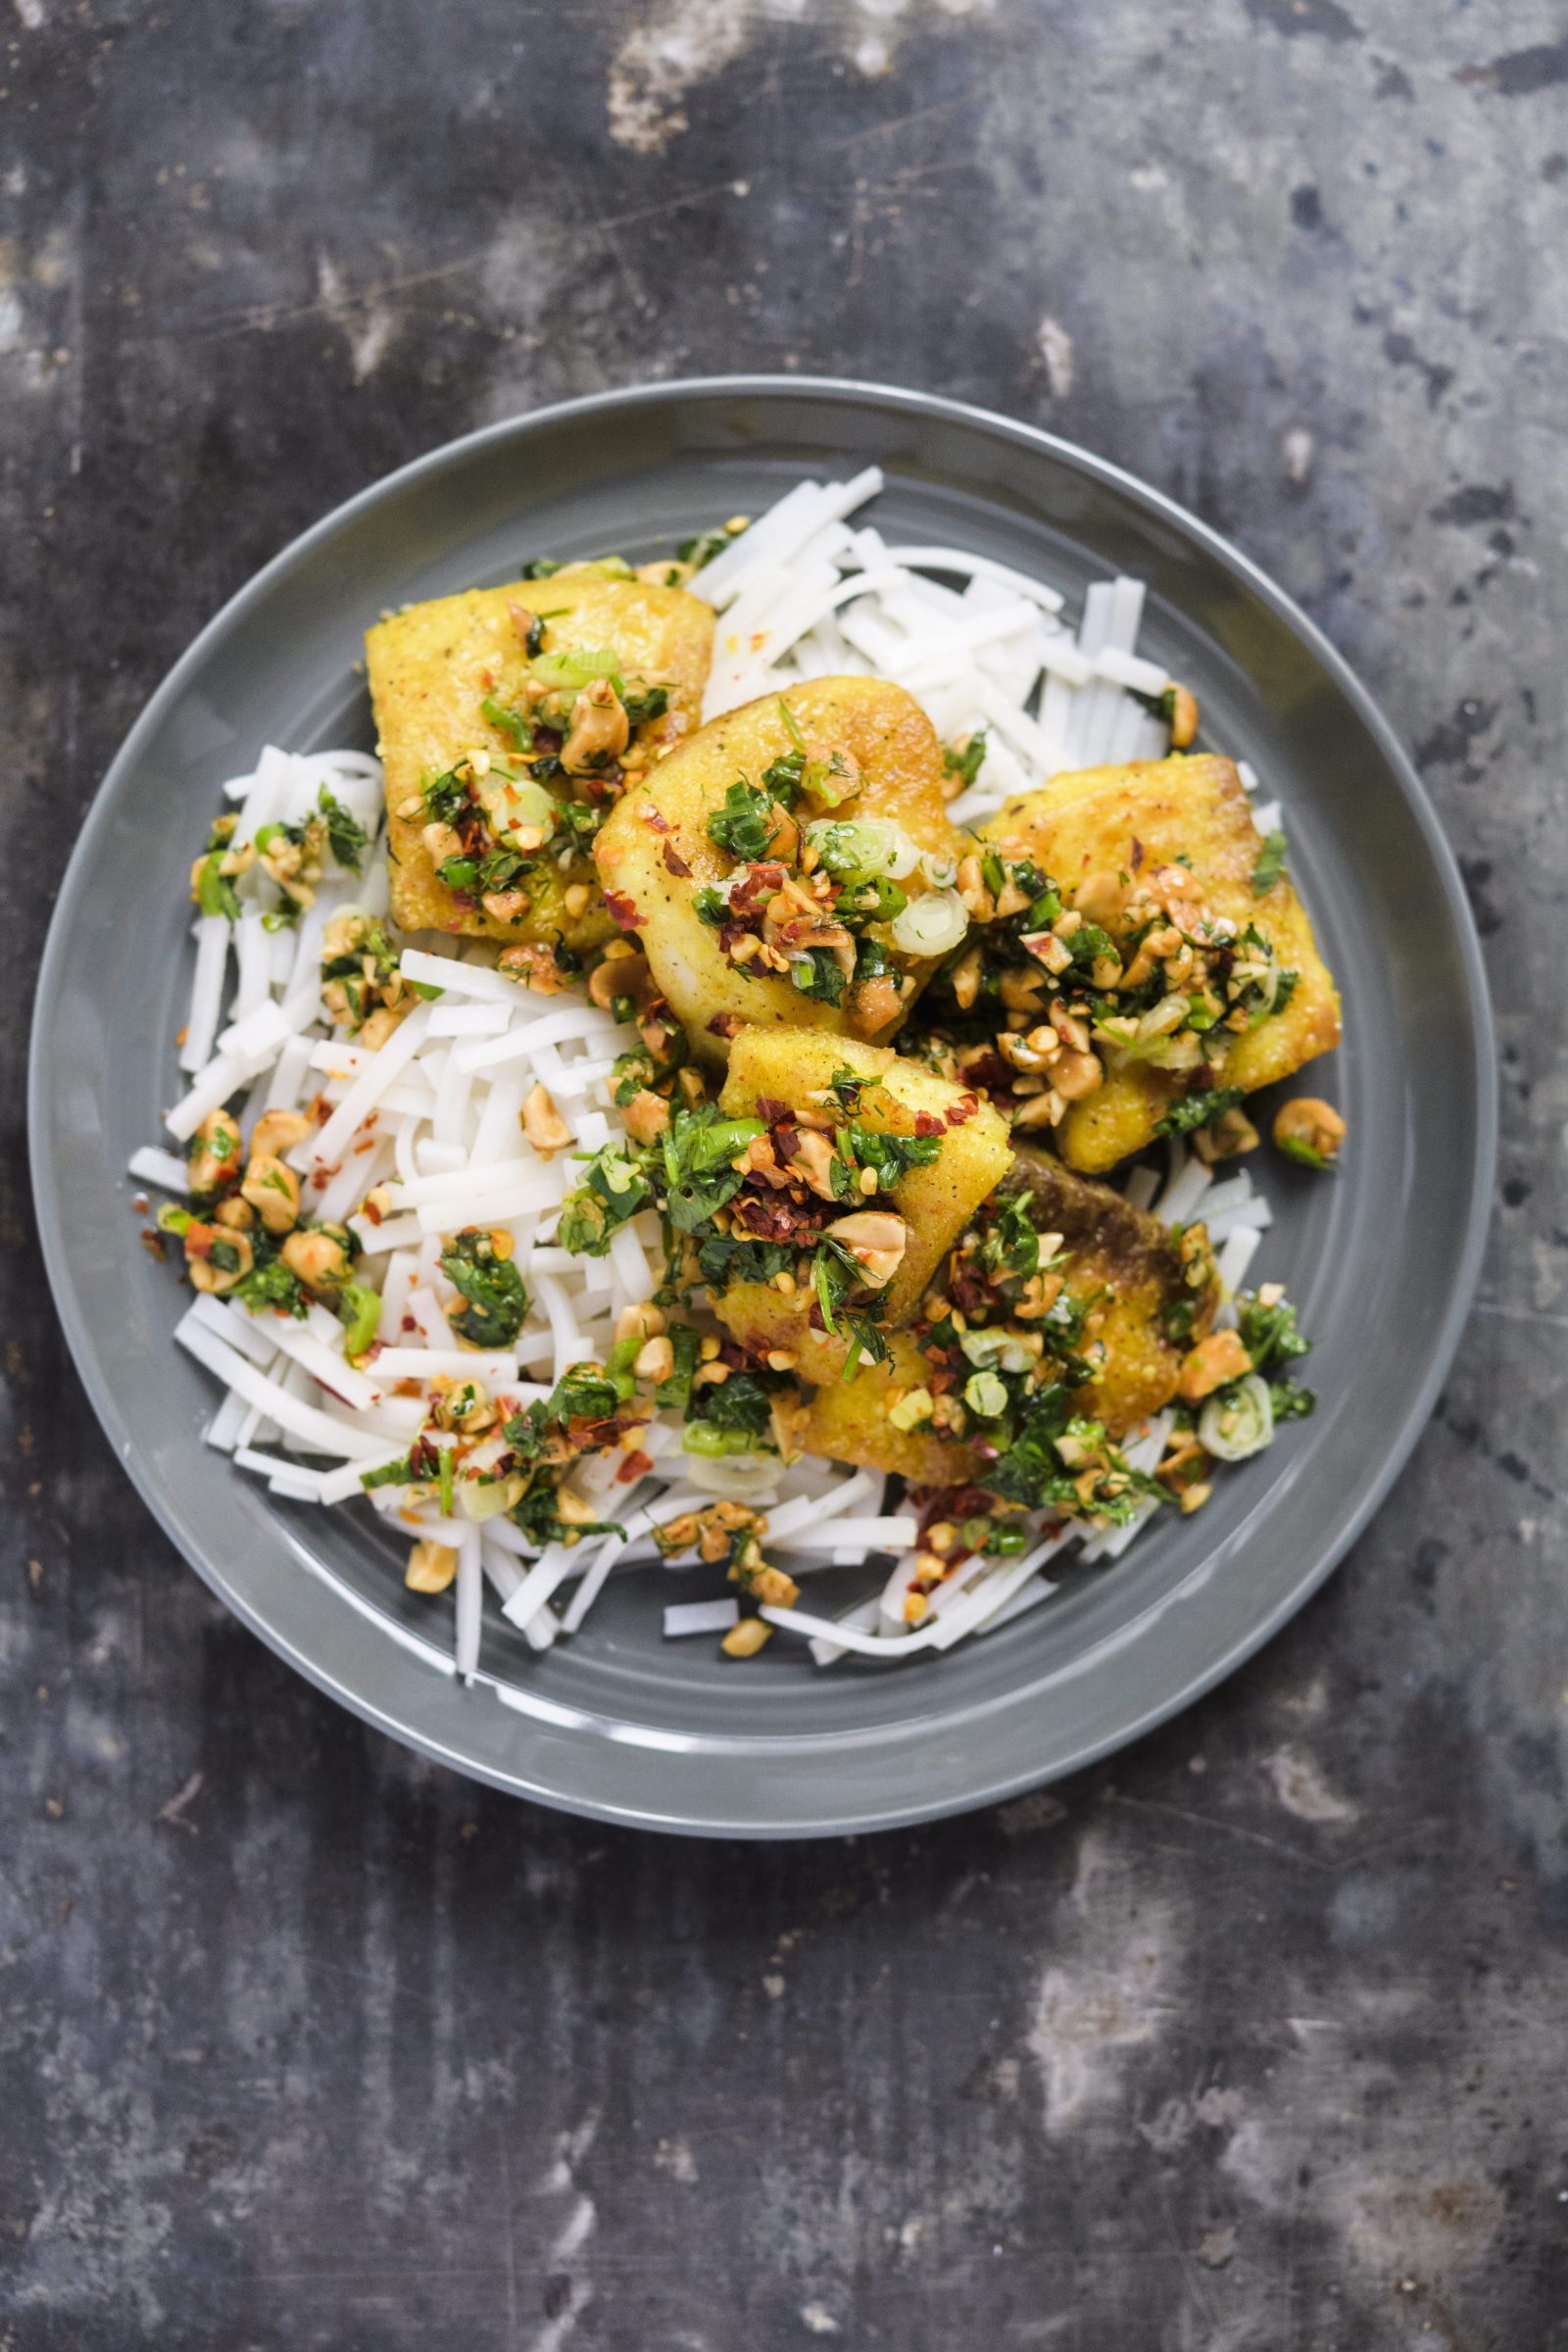 Turmeric-Spiced Fish with Wilted Herbs and Peanuts